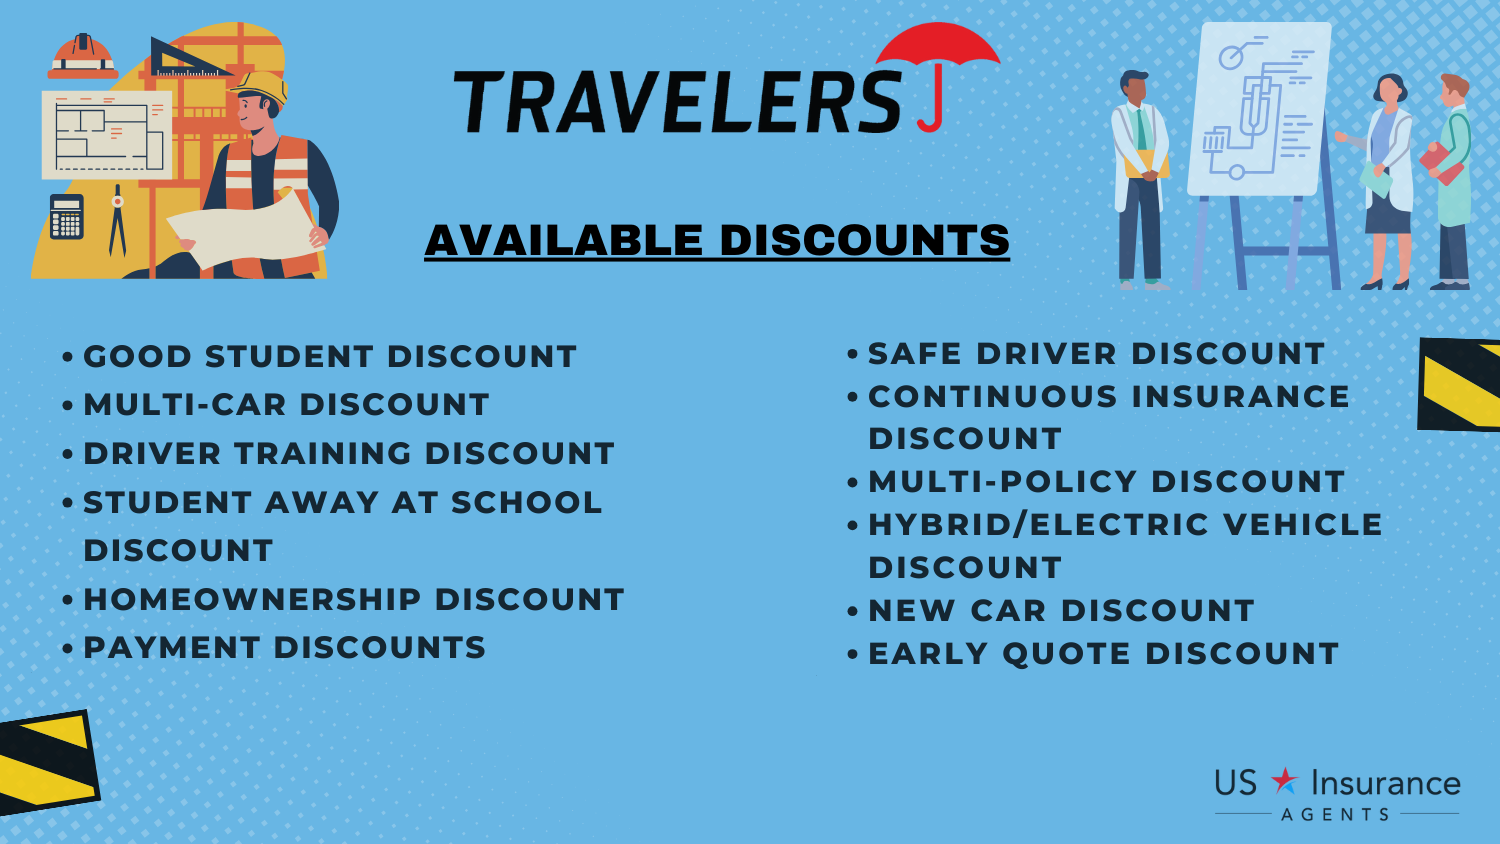 Travelers Discounts: Best Business Insurance for Event Planners